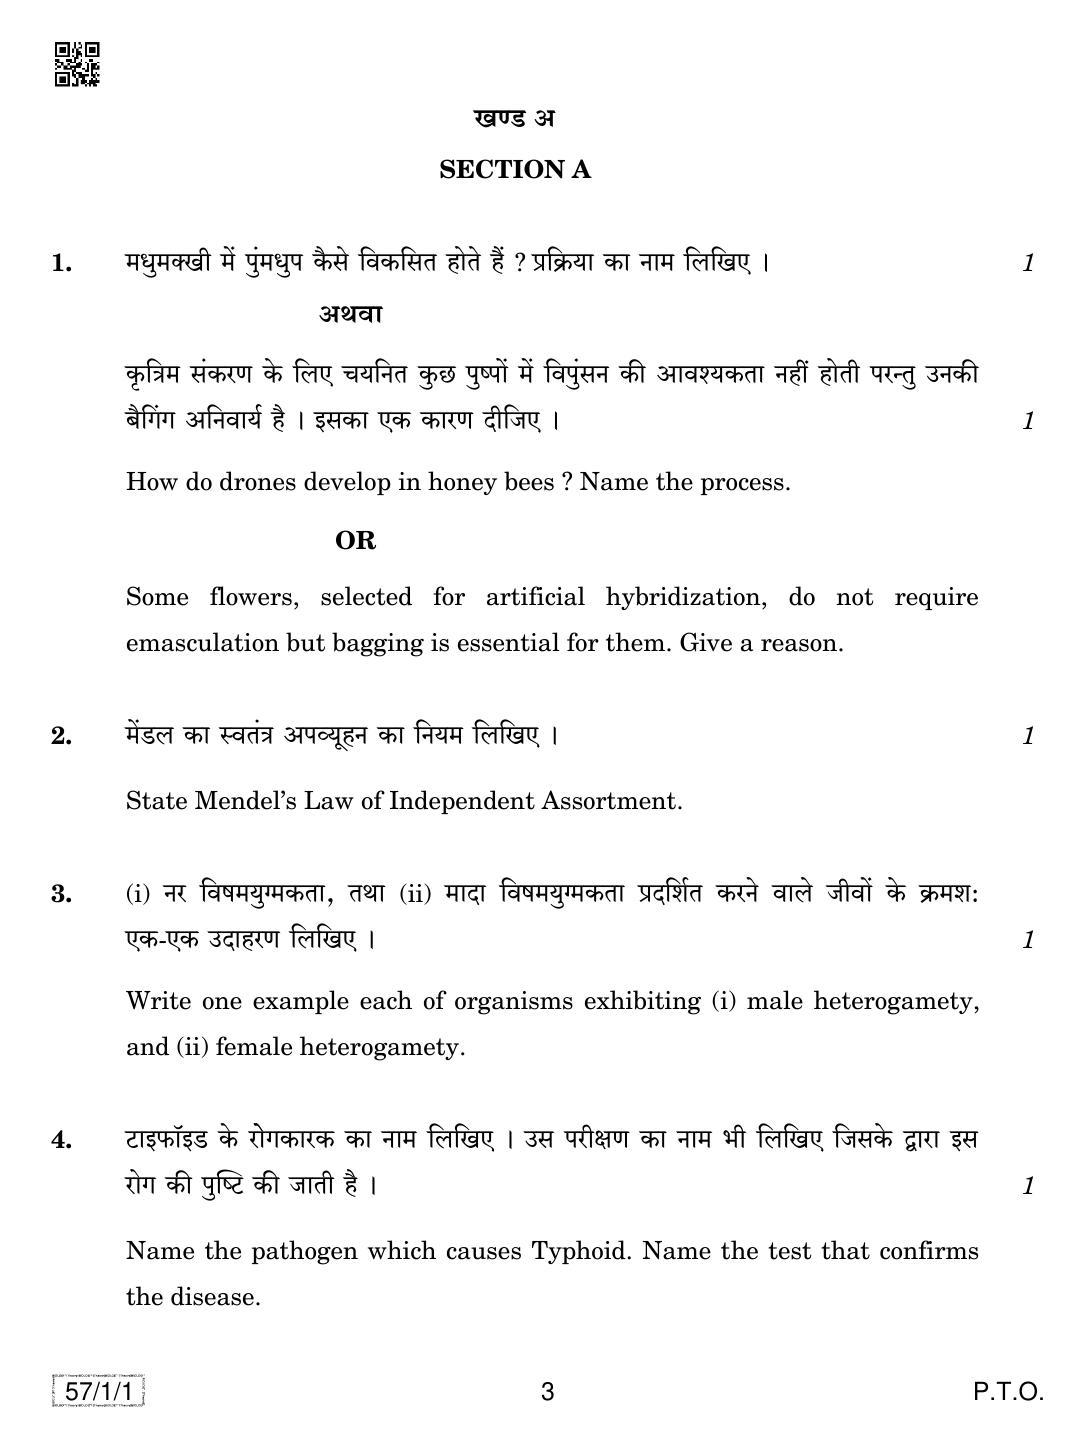 CBSE Class 12 57-1-1 BIOLOGY 2019 Compartment Question Paper - Page 3